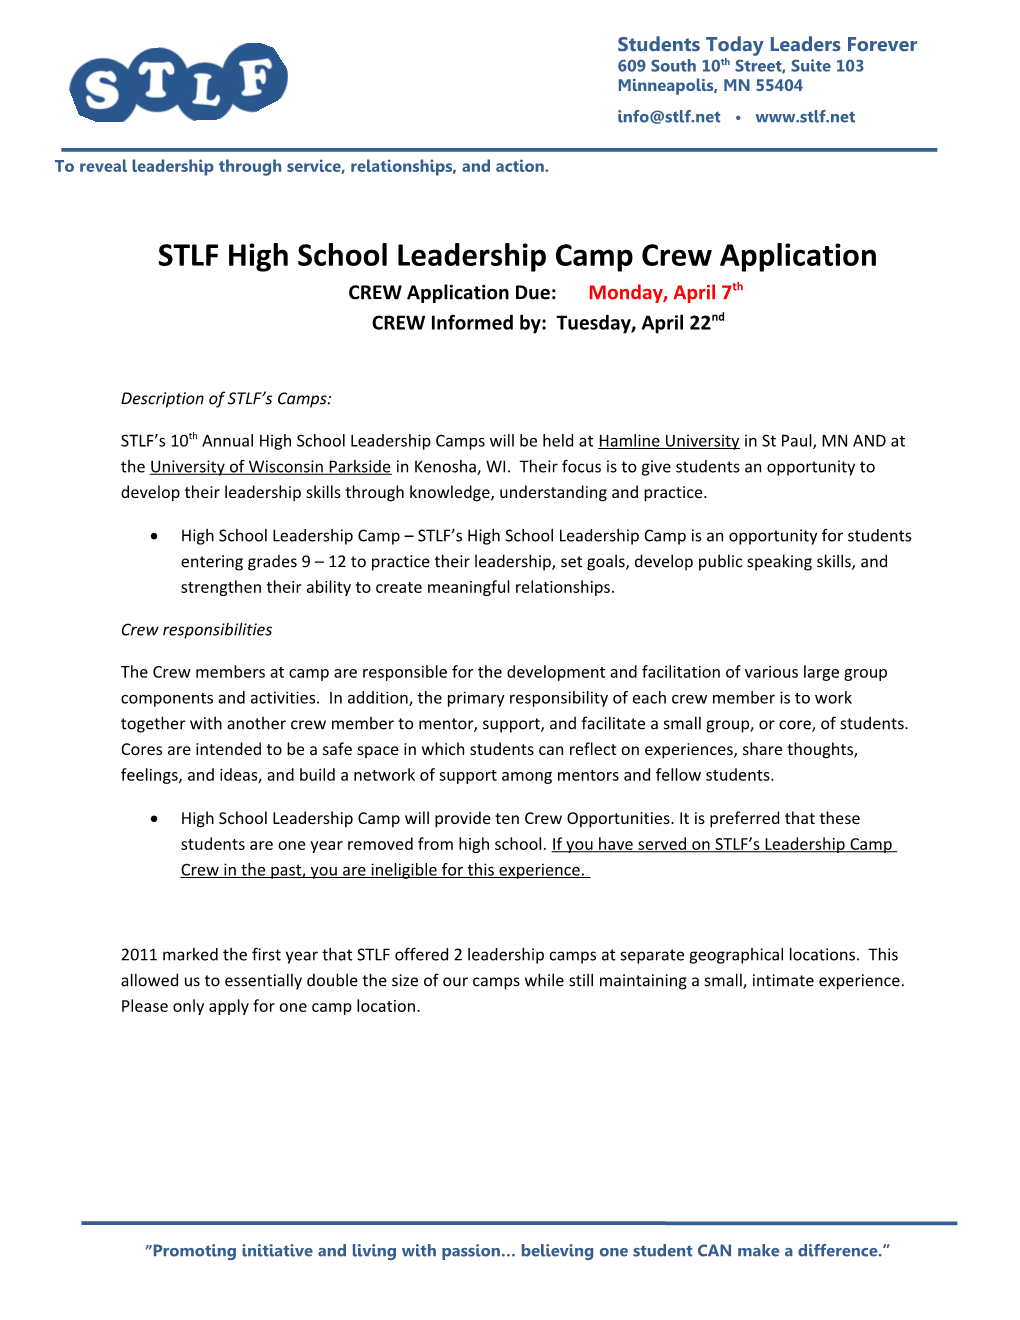 STLF S 10Th Annual High School Leadership Camps Will Be Held at Hamline University in St